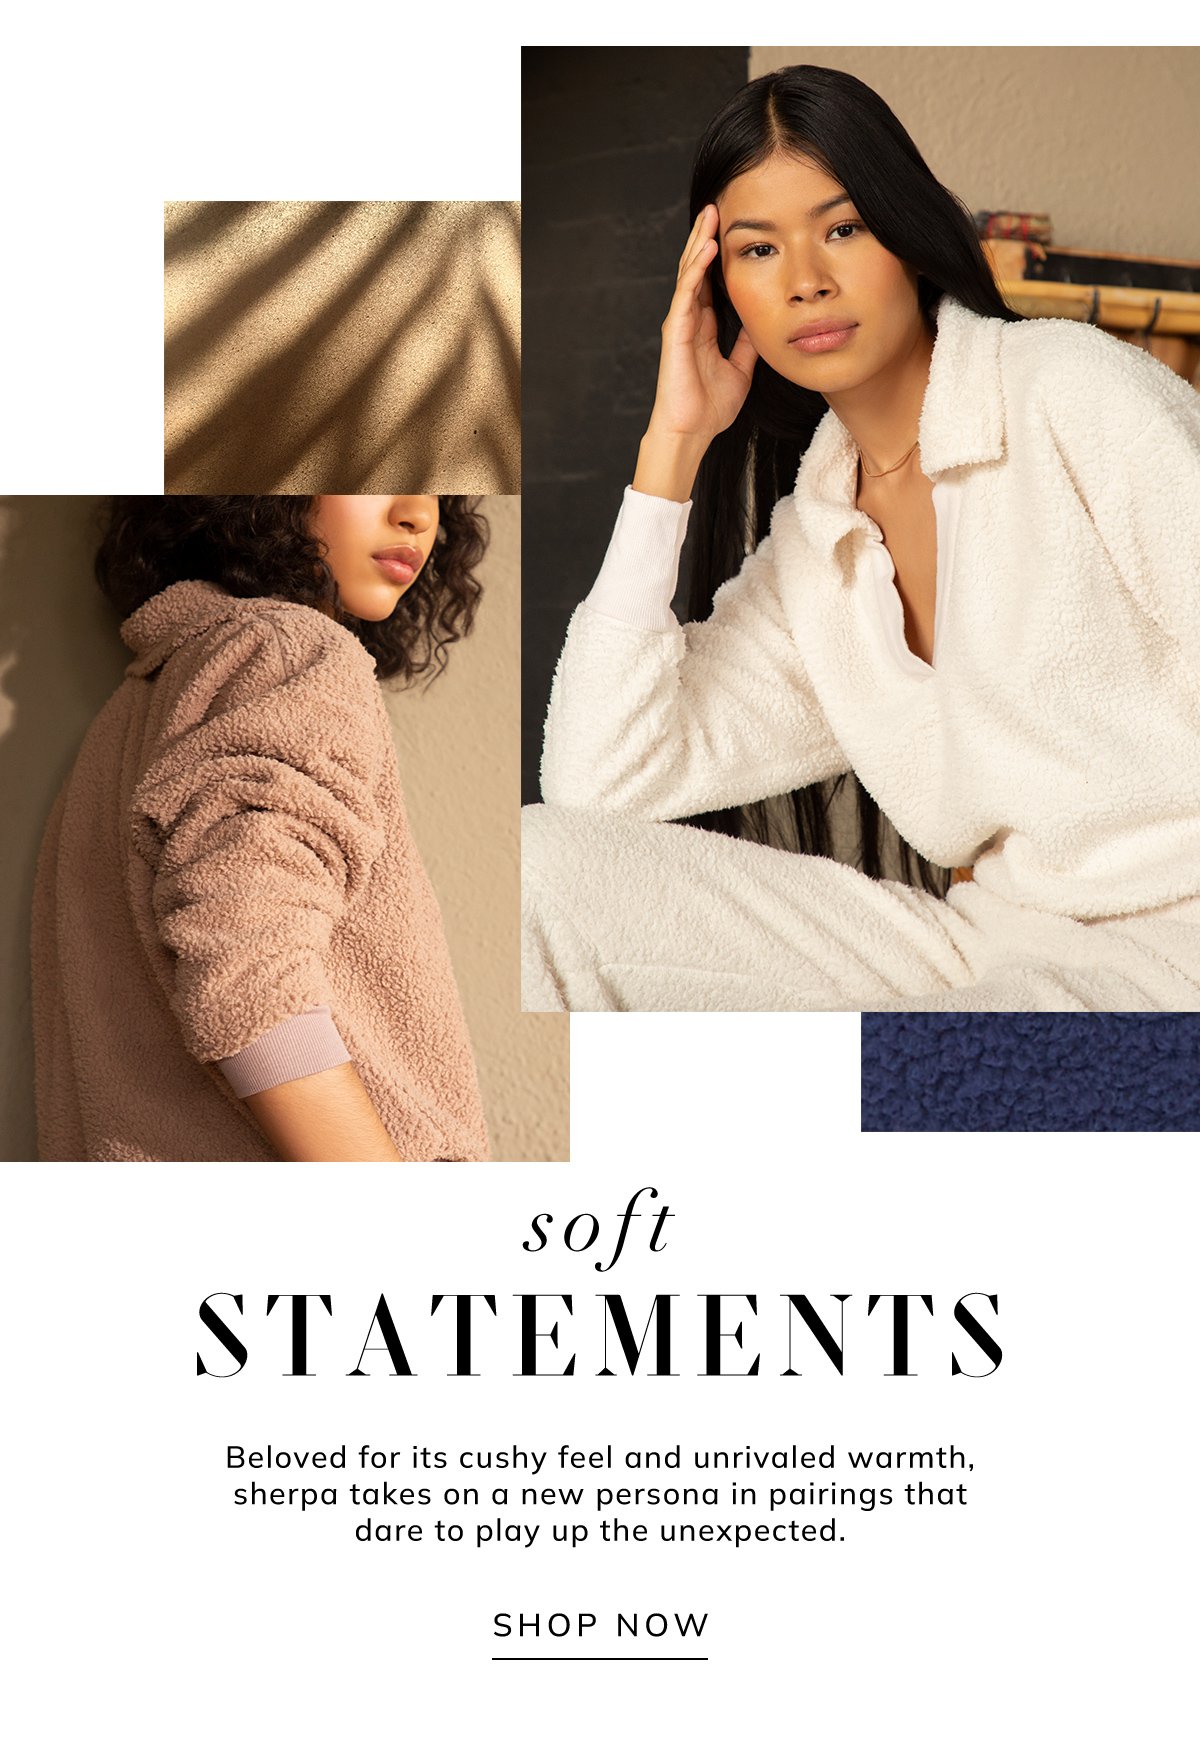 soft statements. beloved for its cushy feel and unrivaled warmth, sherpa takes on a new persona in pairings that dare to play up the unexpected. shop now.